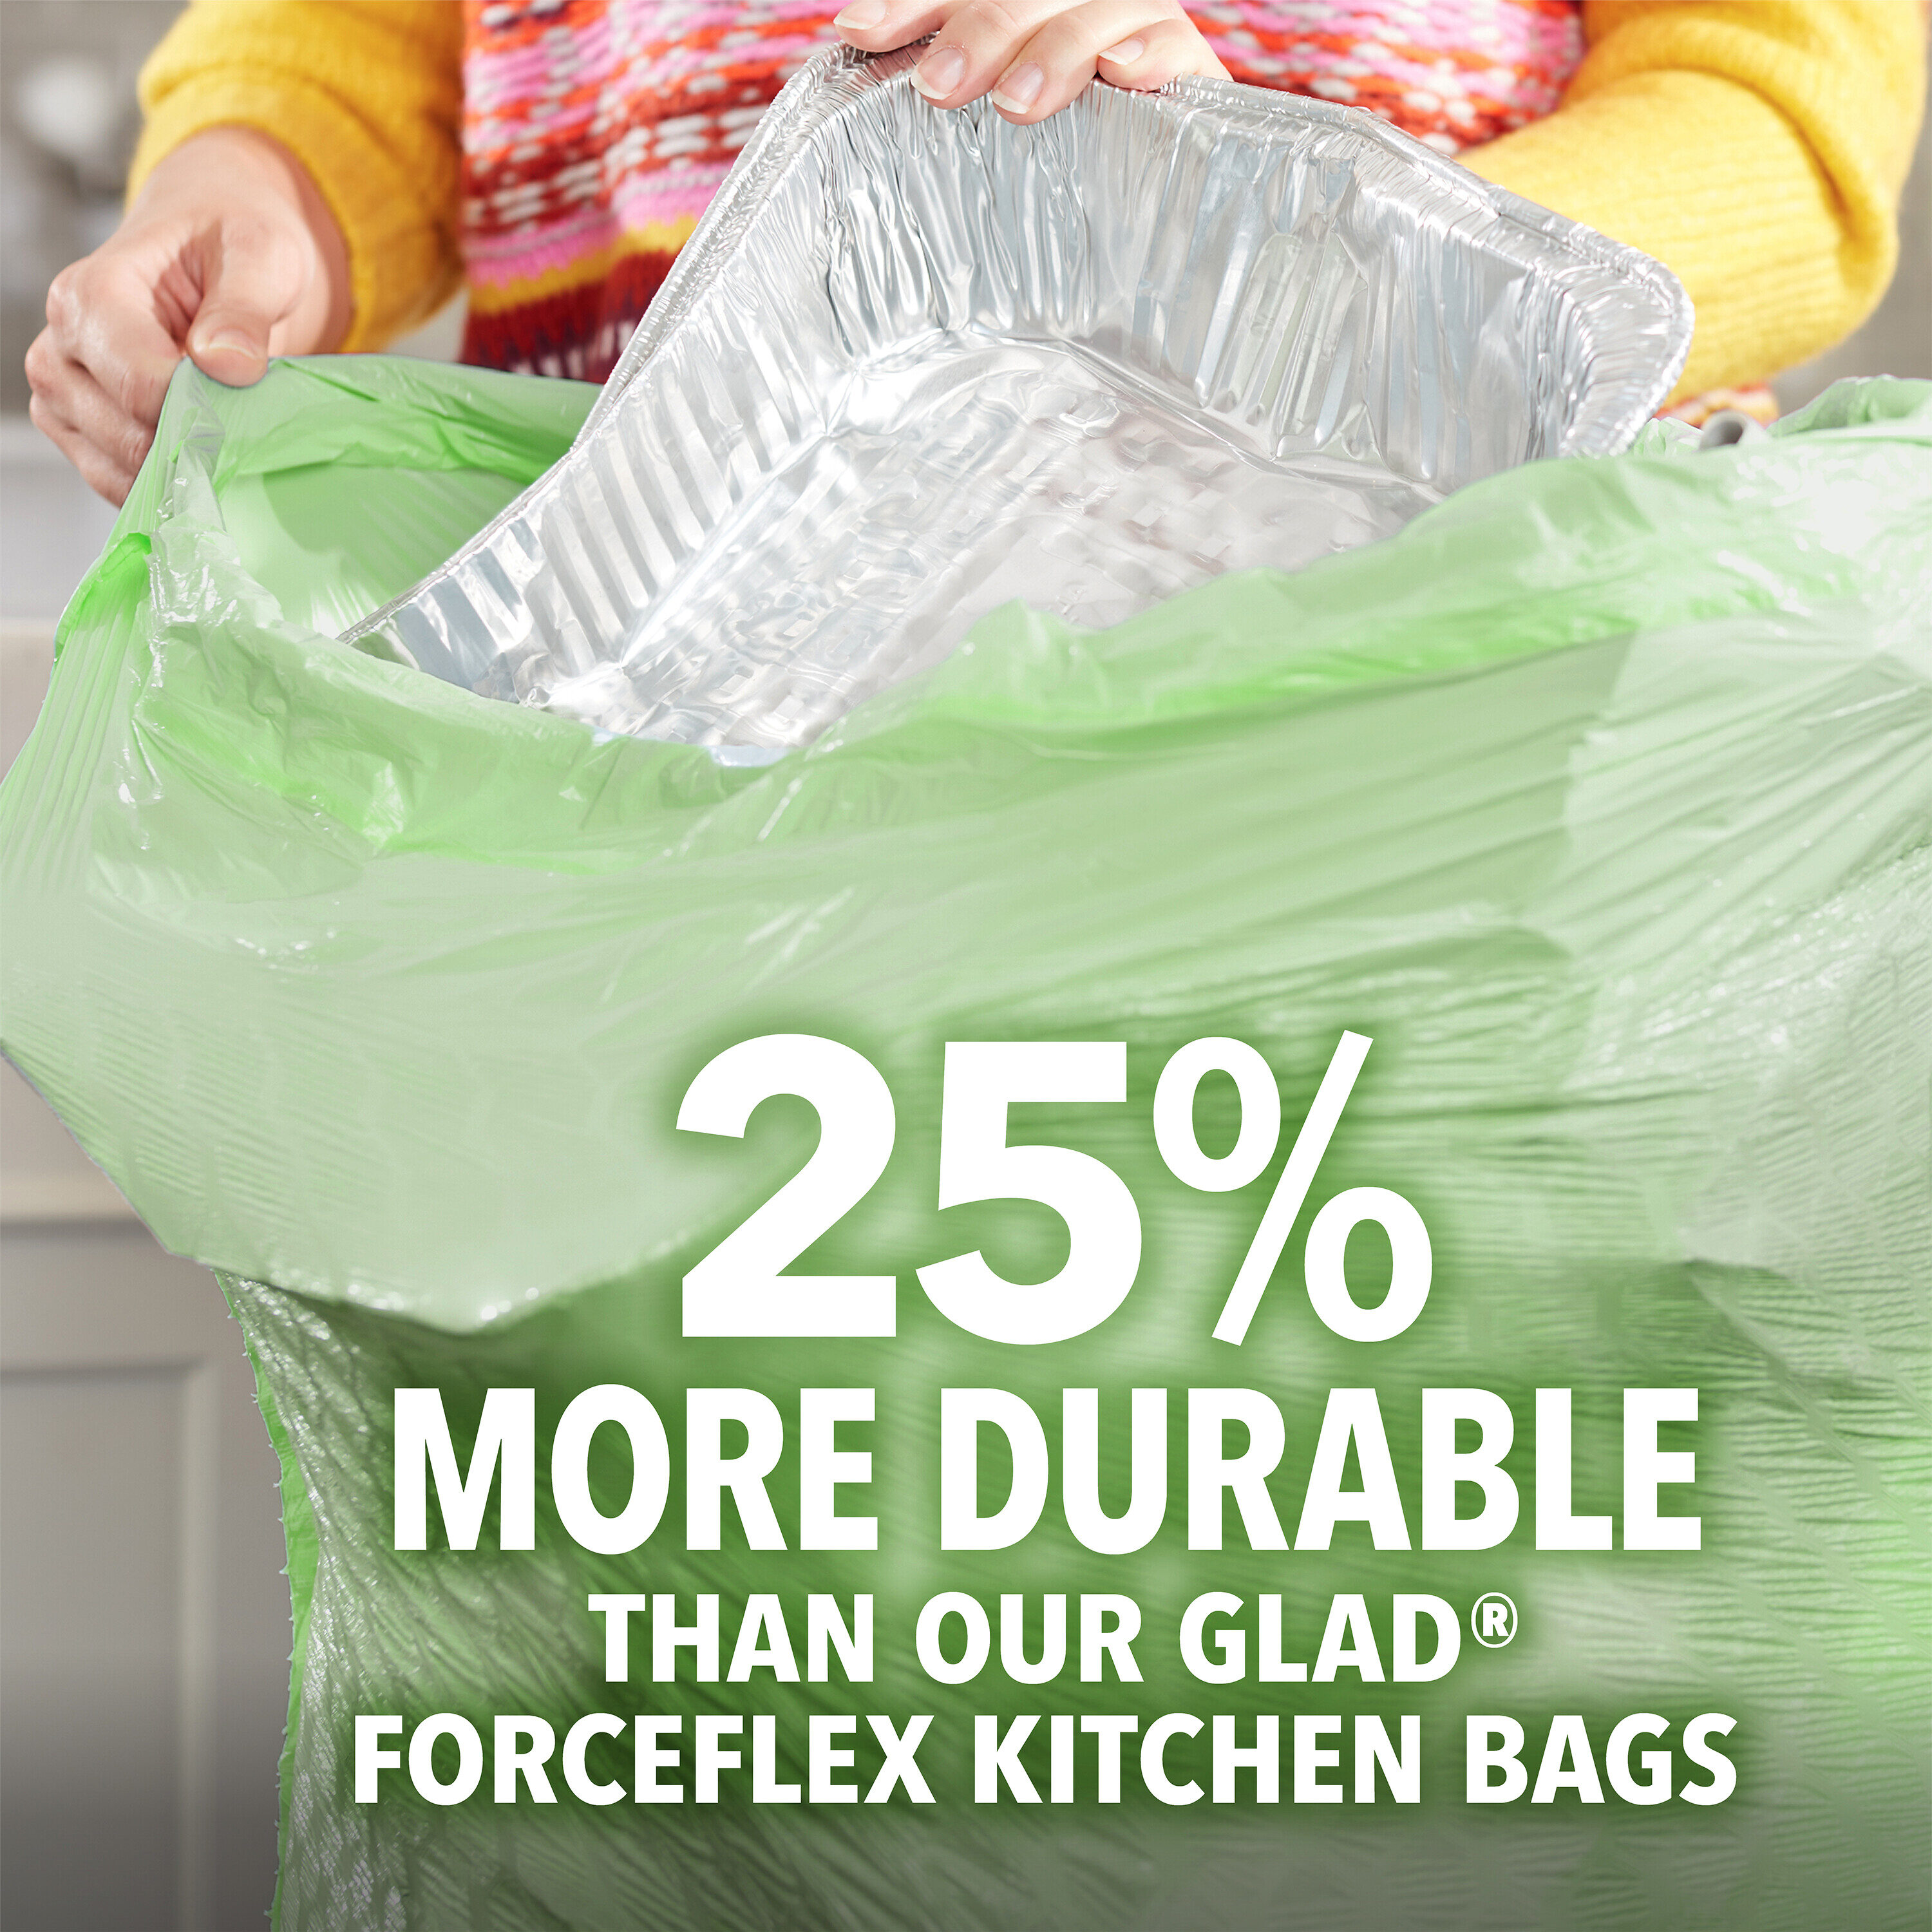 Citron & Lime Scented Green Tall Kitchen ForceFlex MaxStrength™ Trash Bags